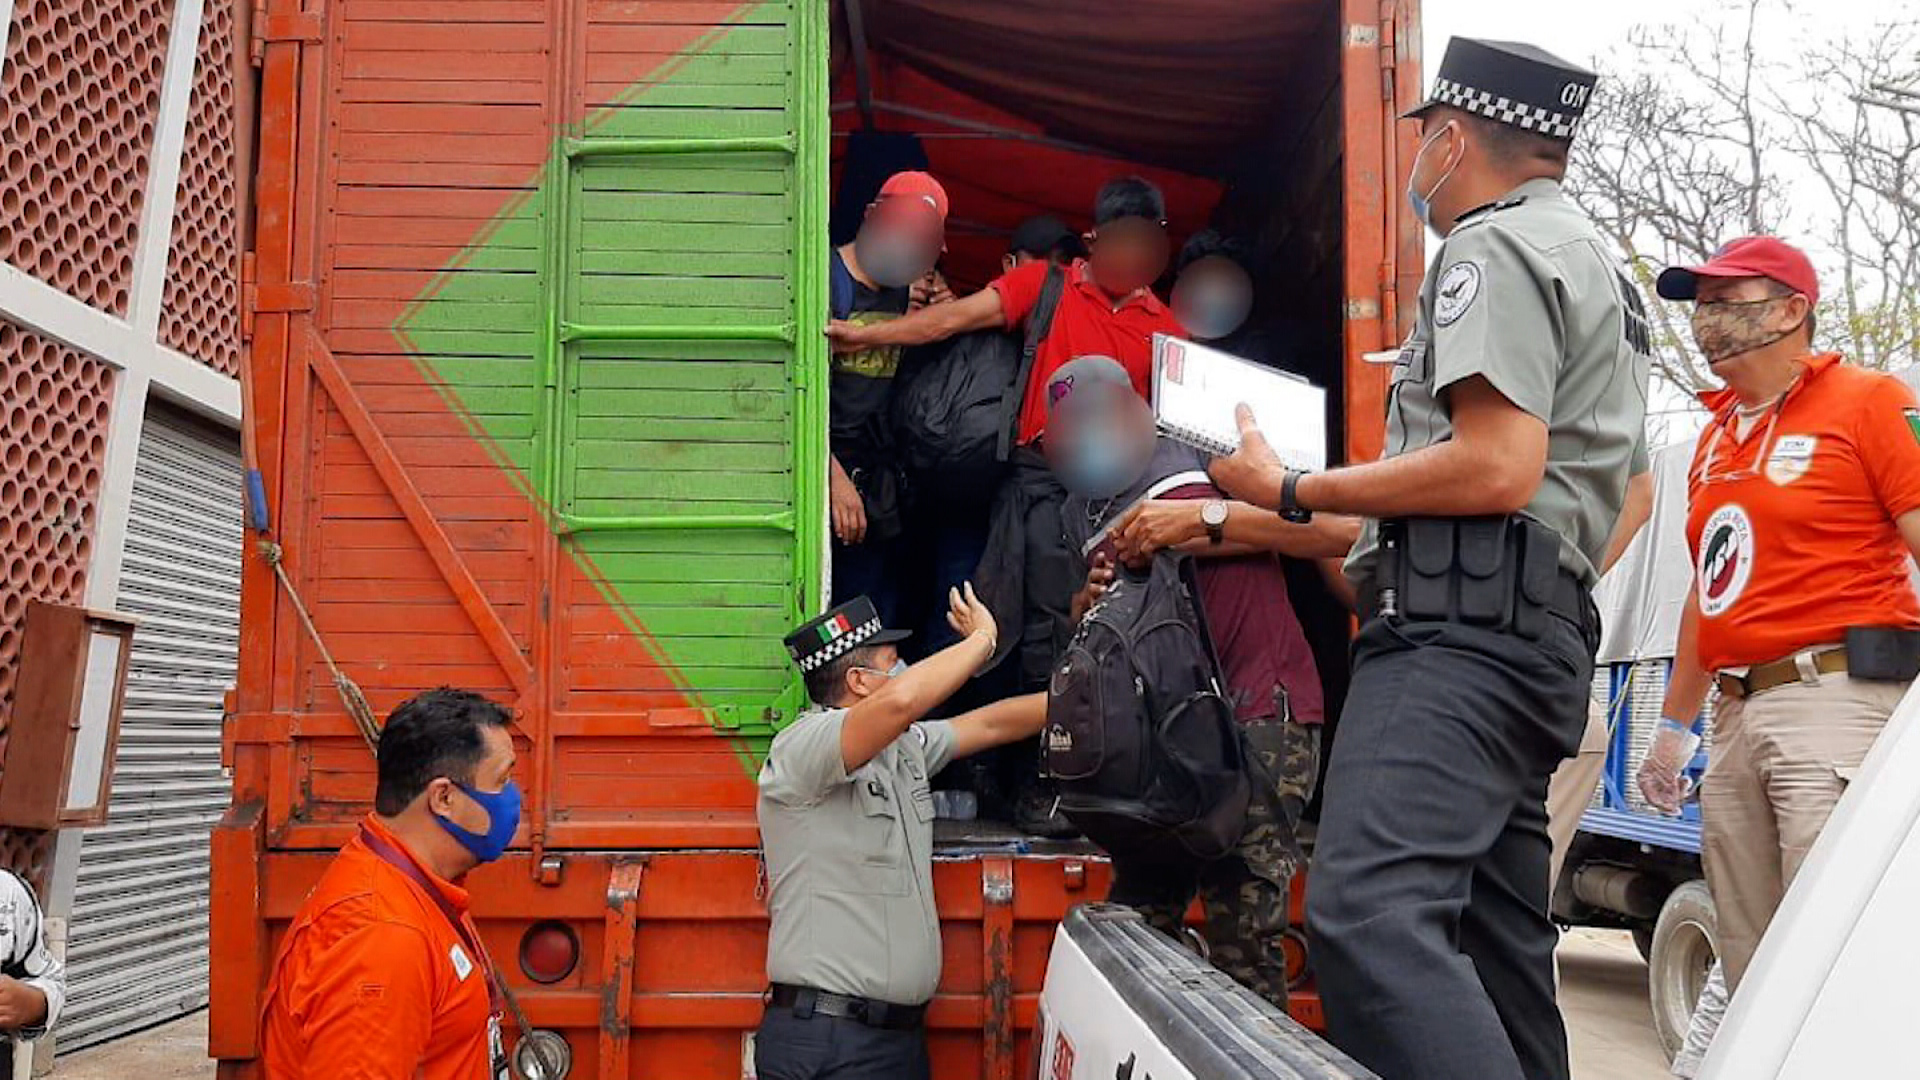 find more than 300 migrants hacked in trucks